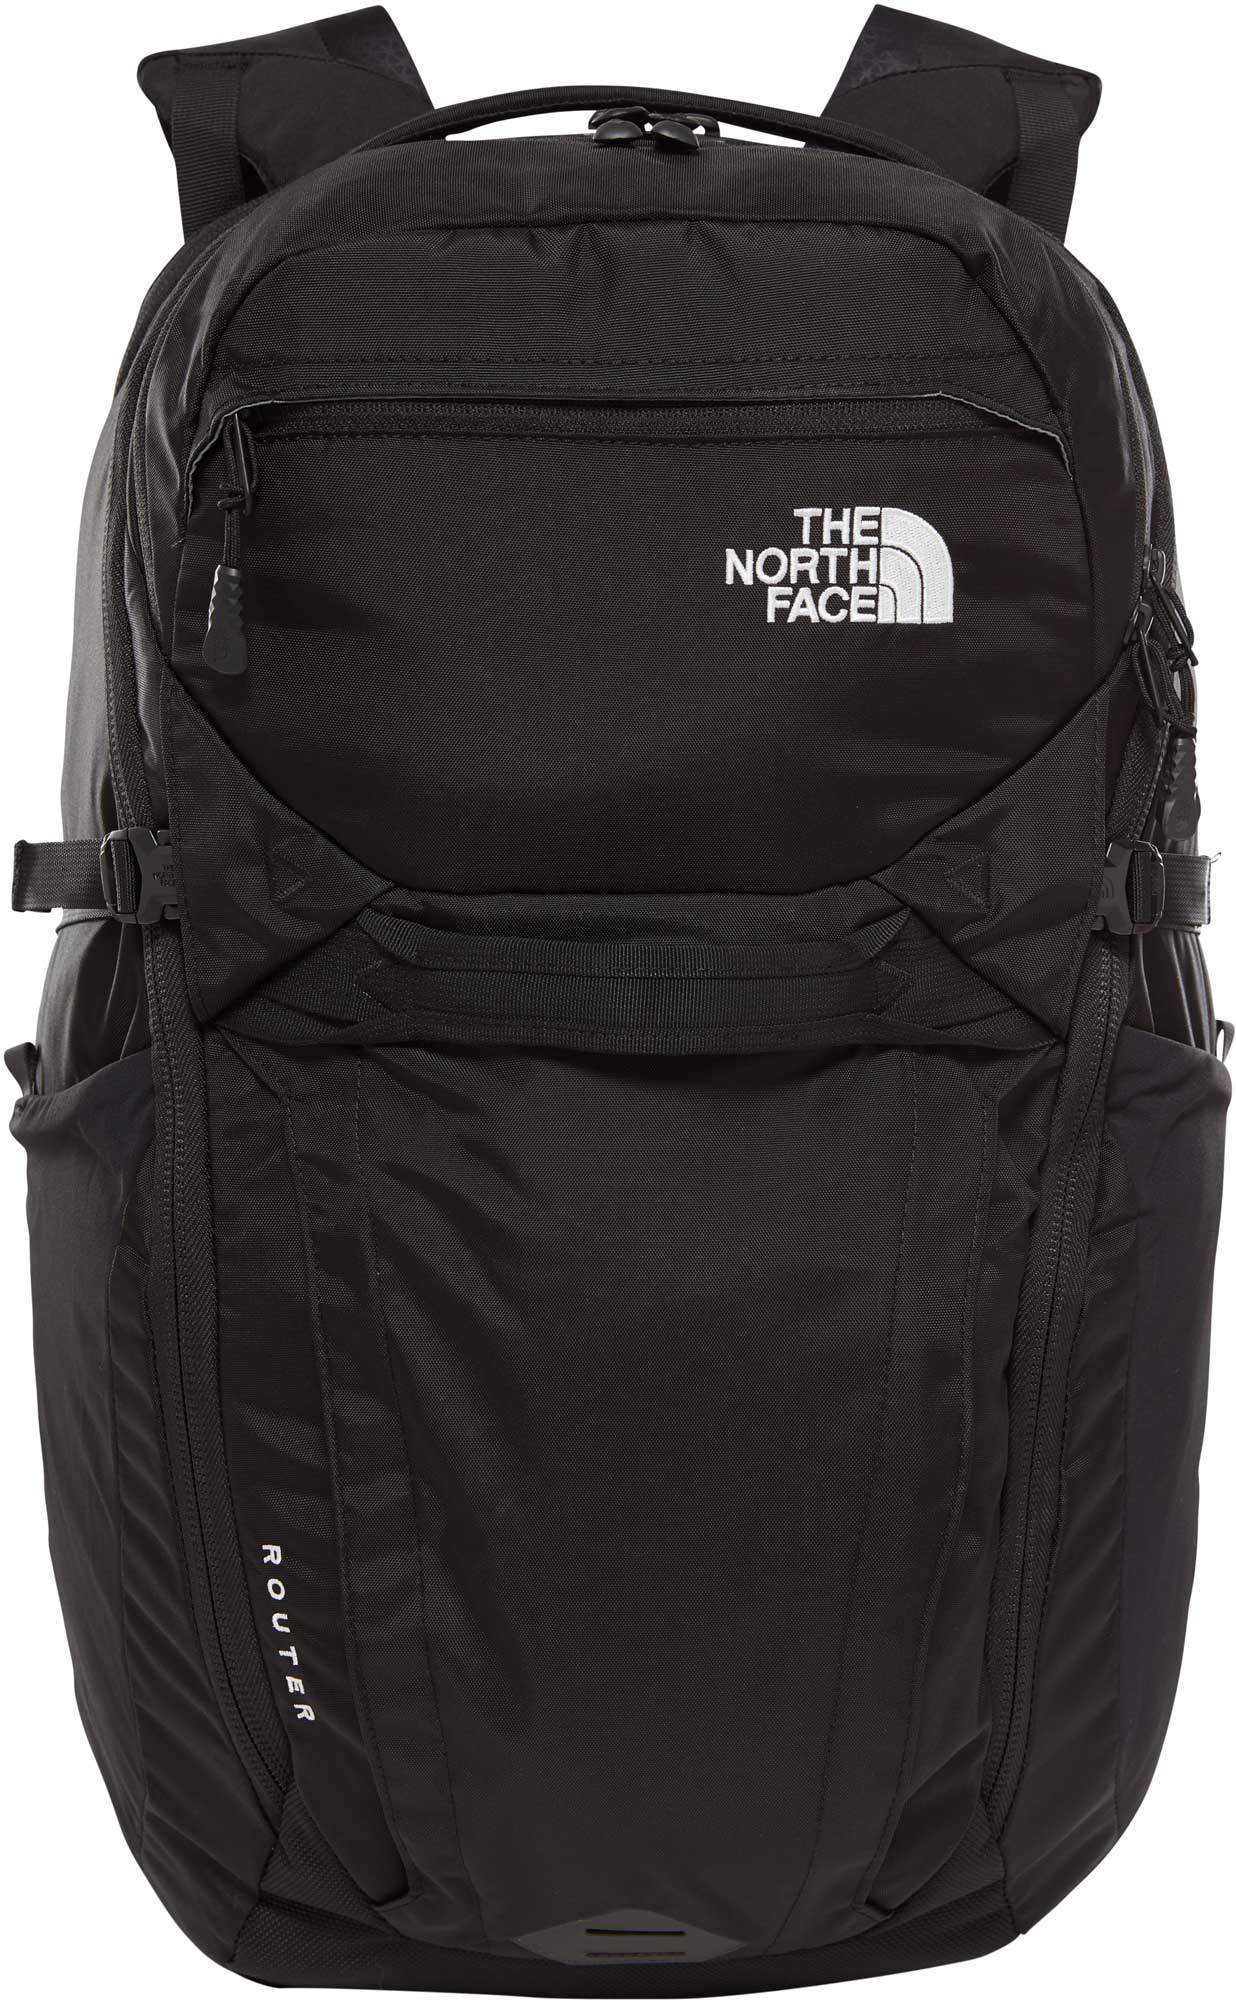 City backpack